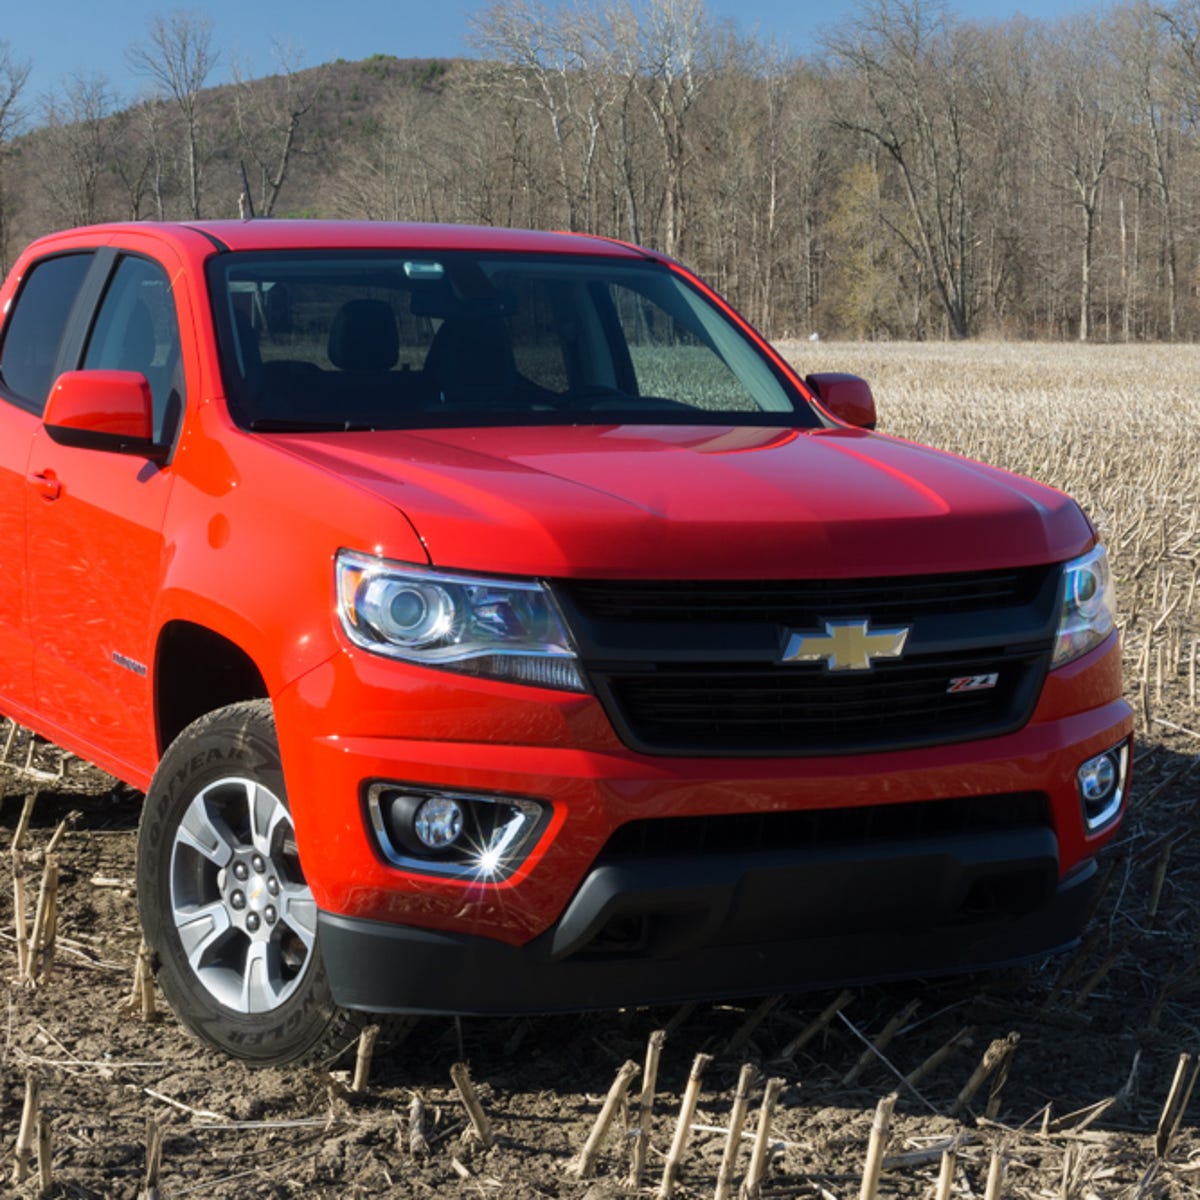 2015 Chevrolet Colorado Crew Cab review: Chevy's Colorado Crew Cab is an  almost-perfect compromise - CNET